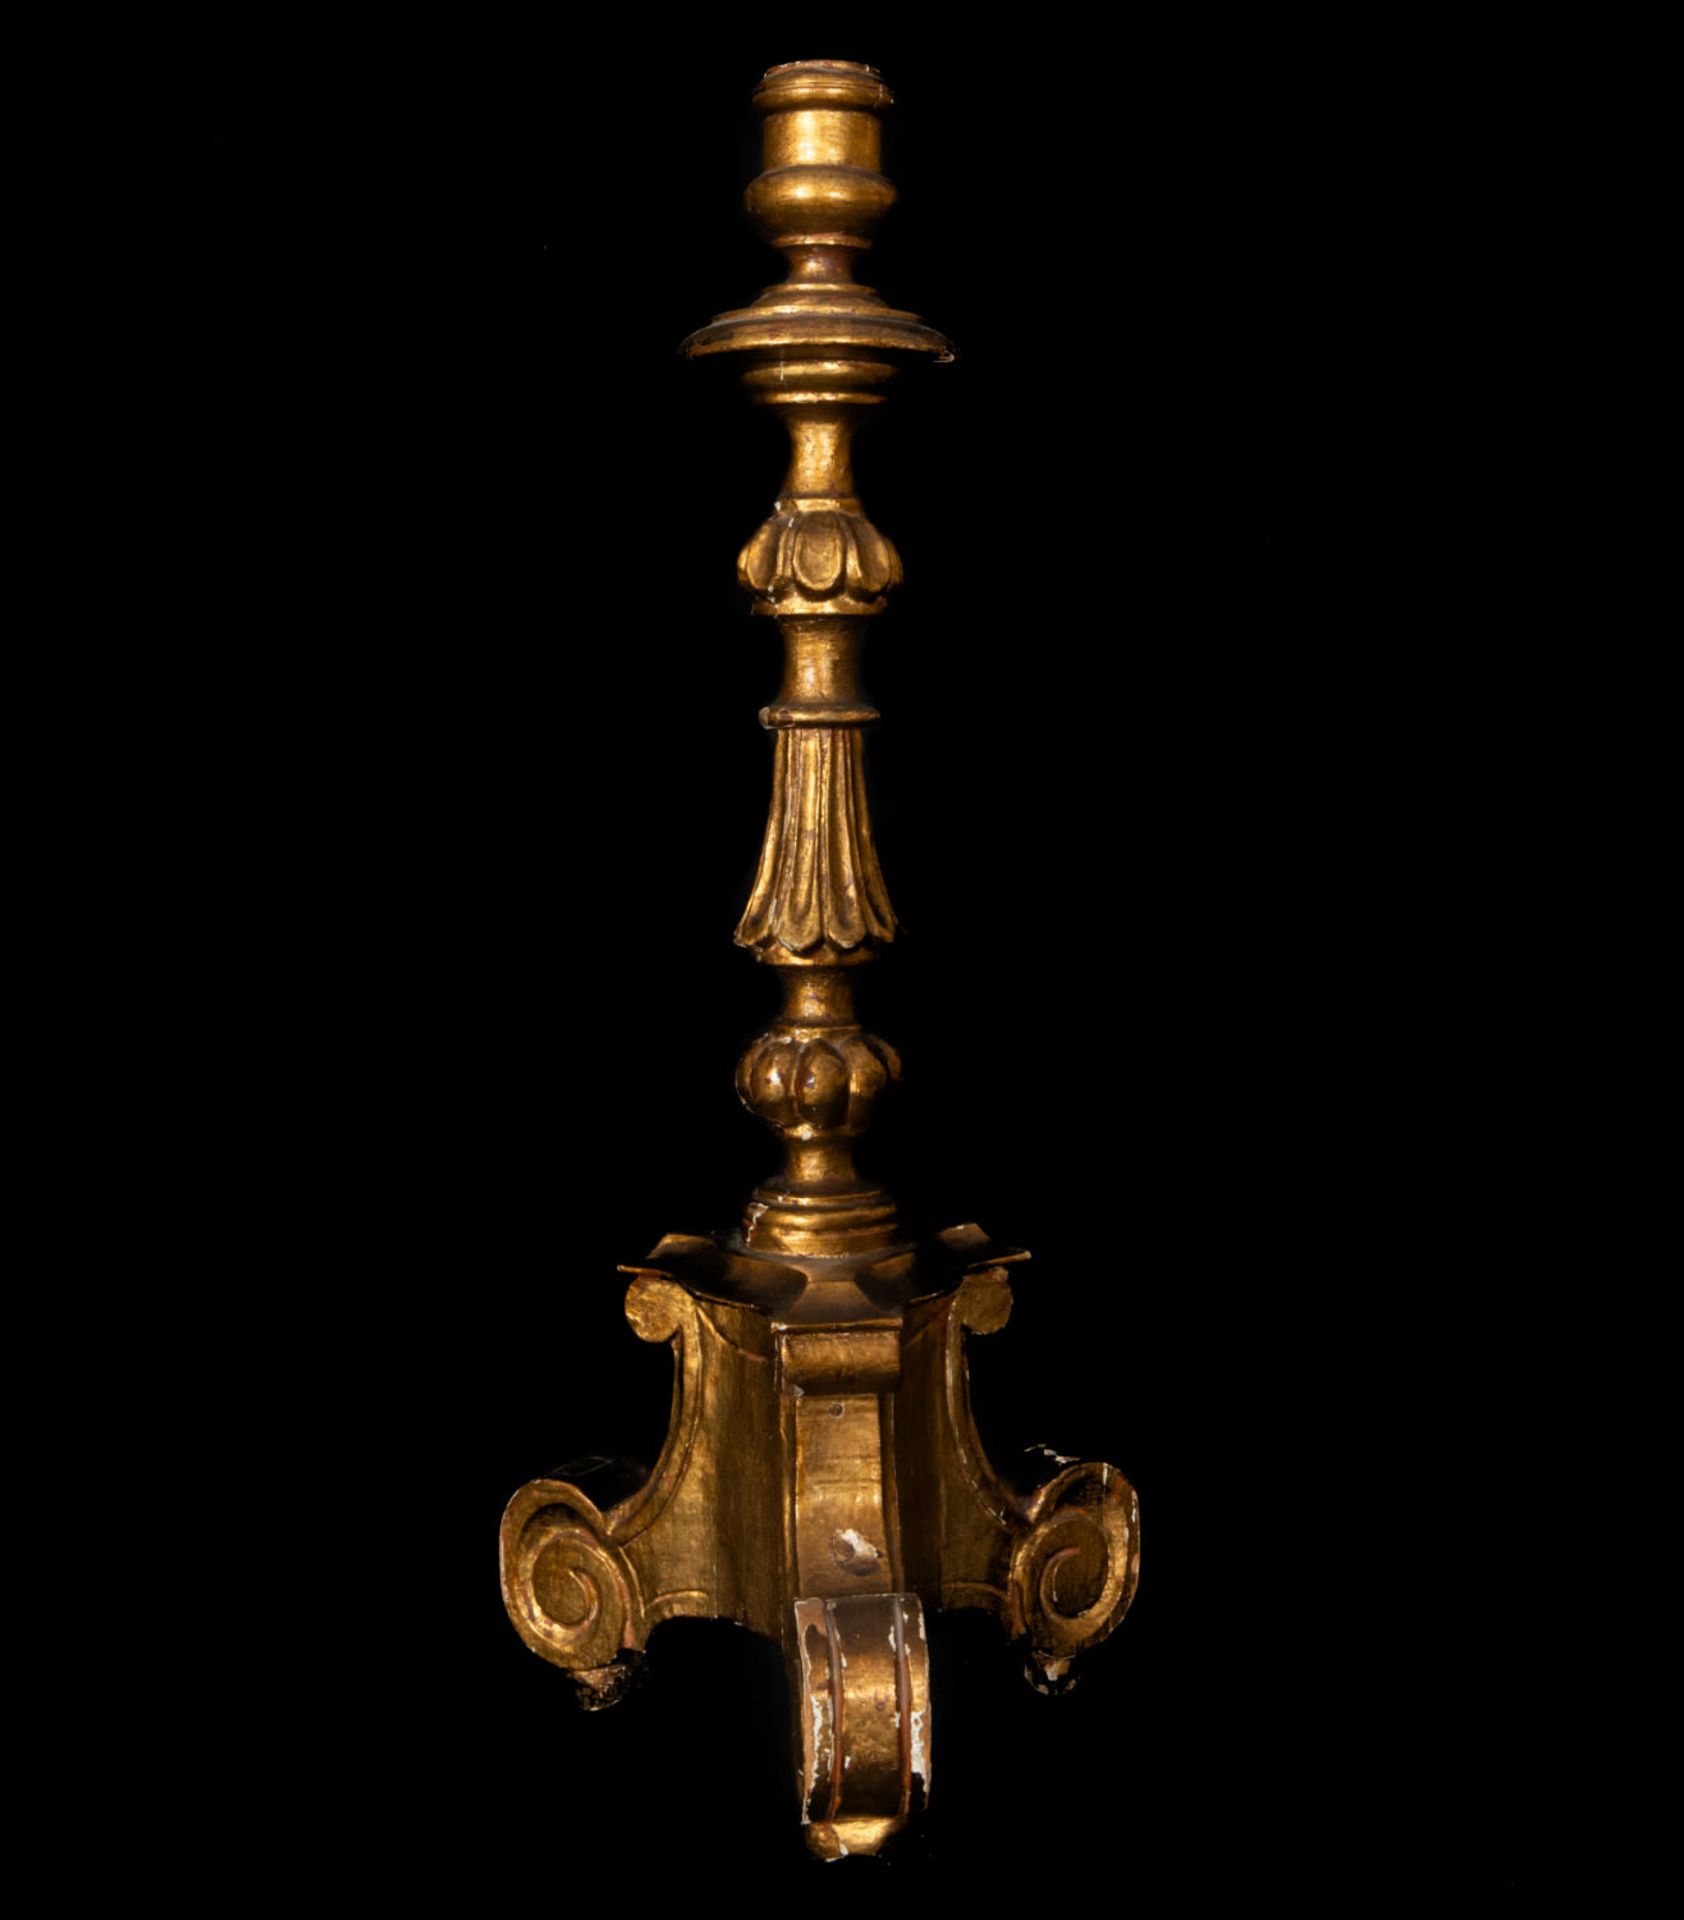 Candelabra to mount on a wooden lamp, 18th century